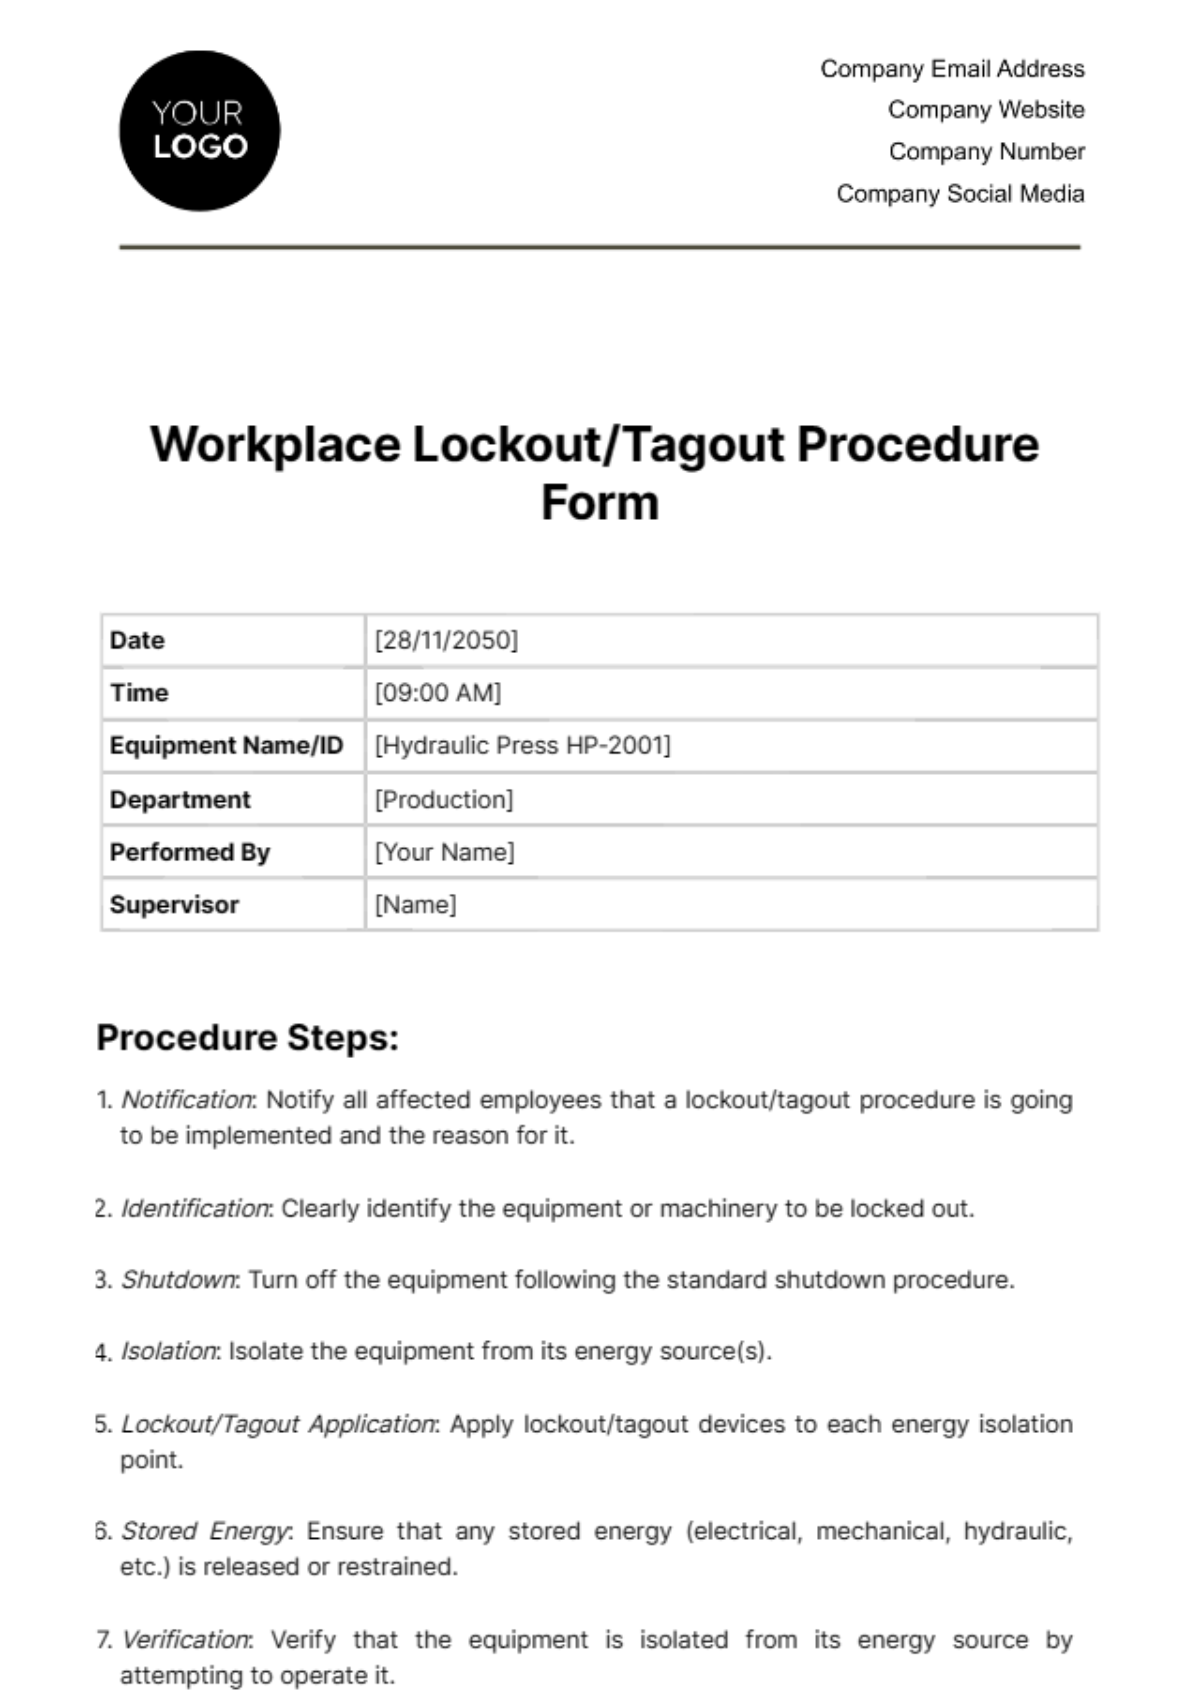 Free Workplace Lockout/Tagout Procedure Form Template